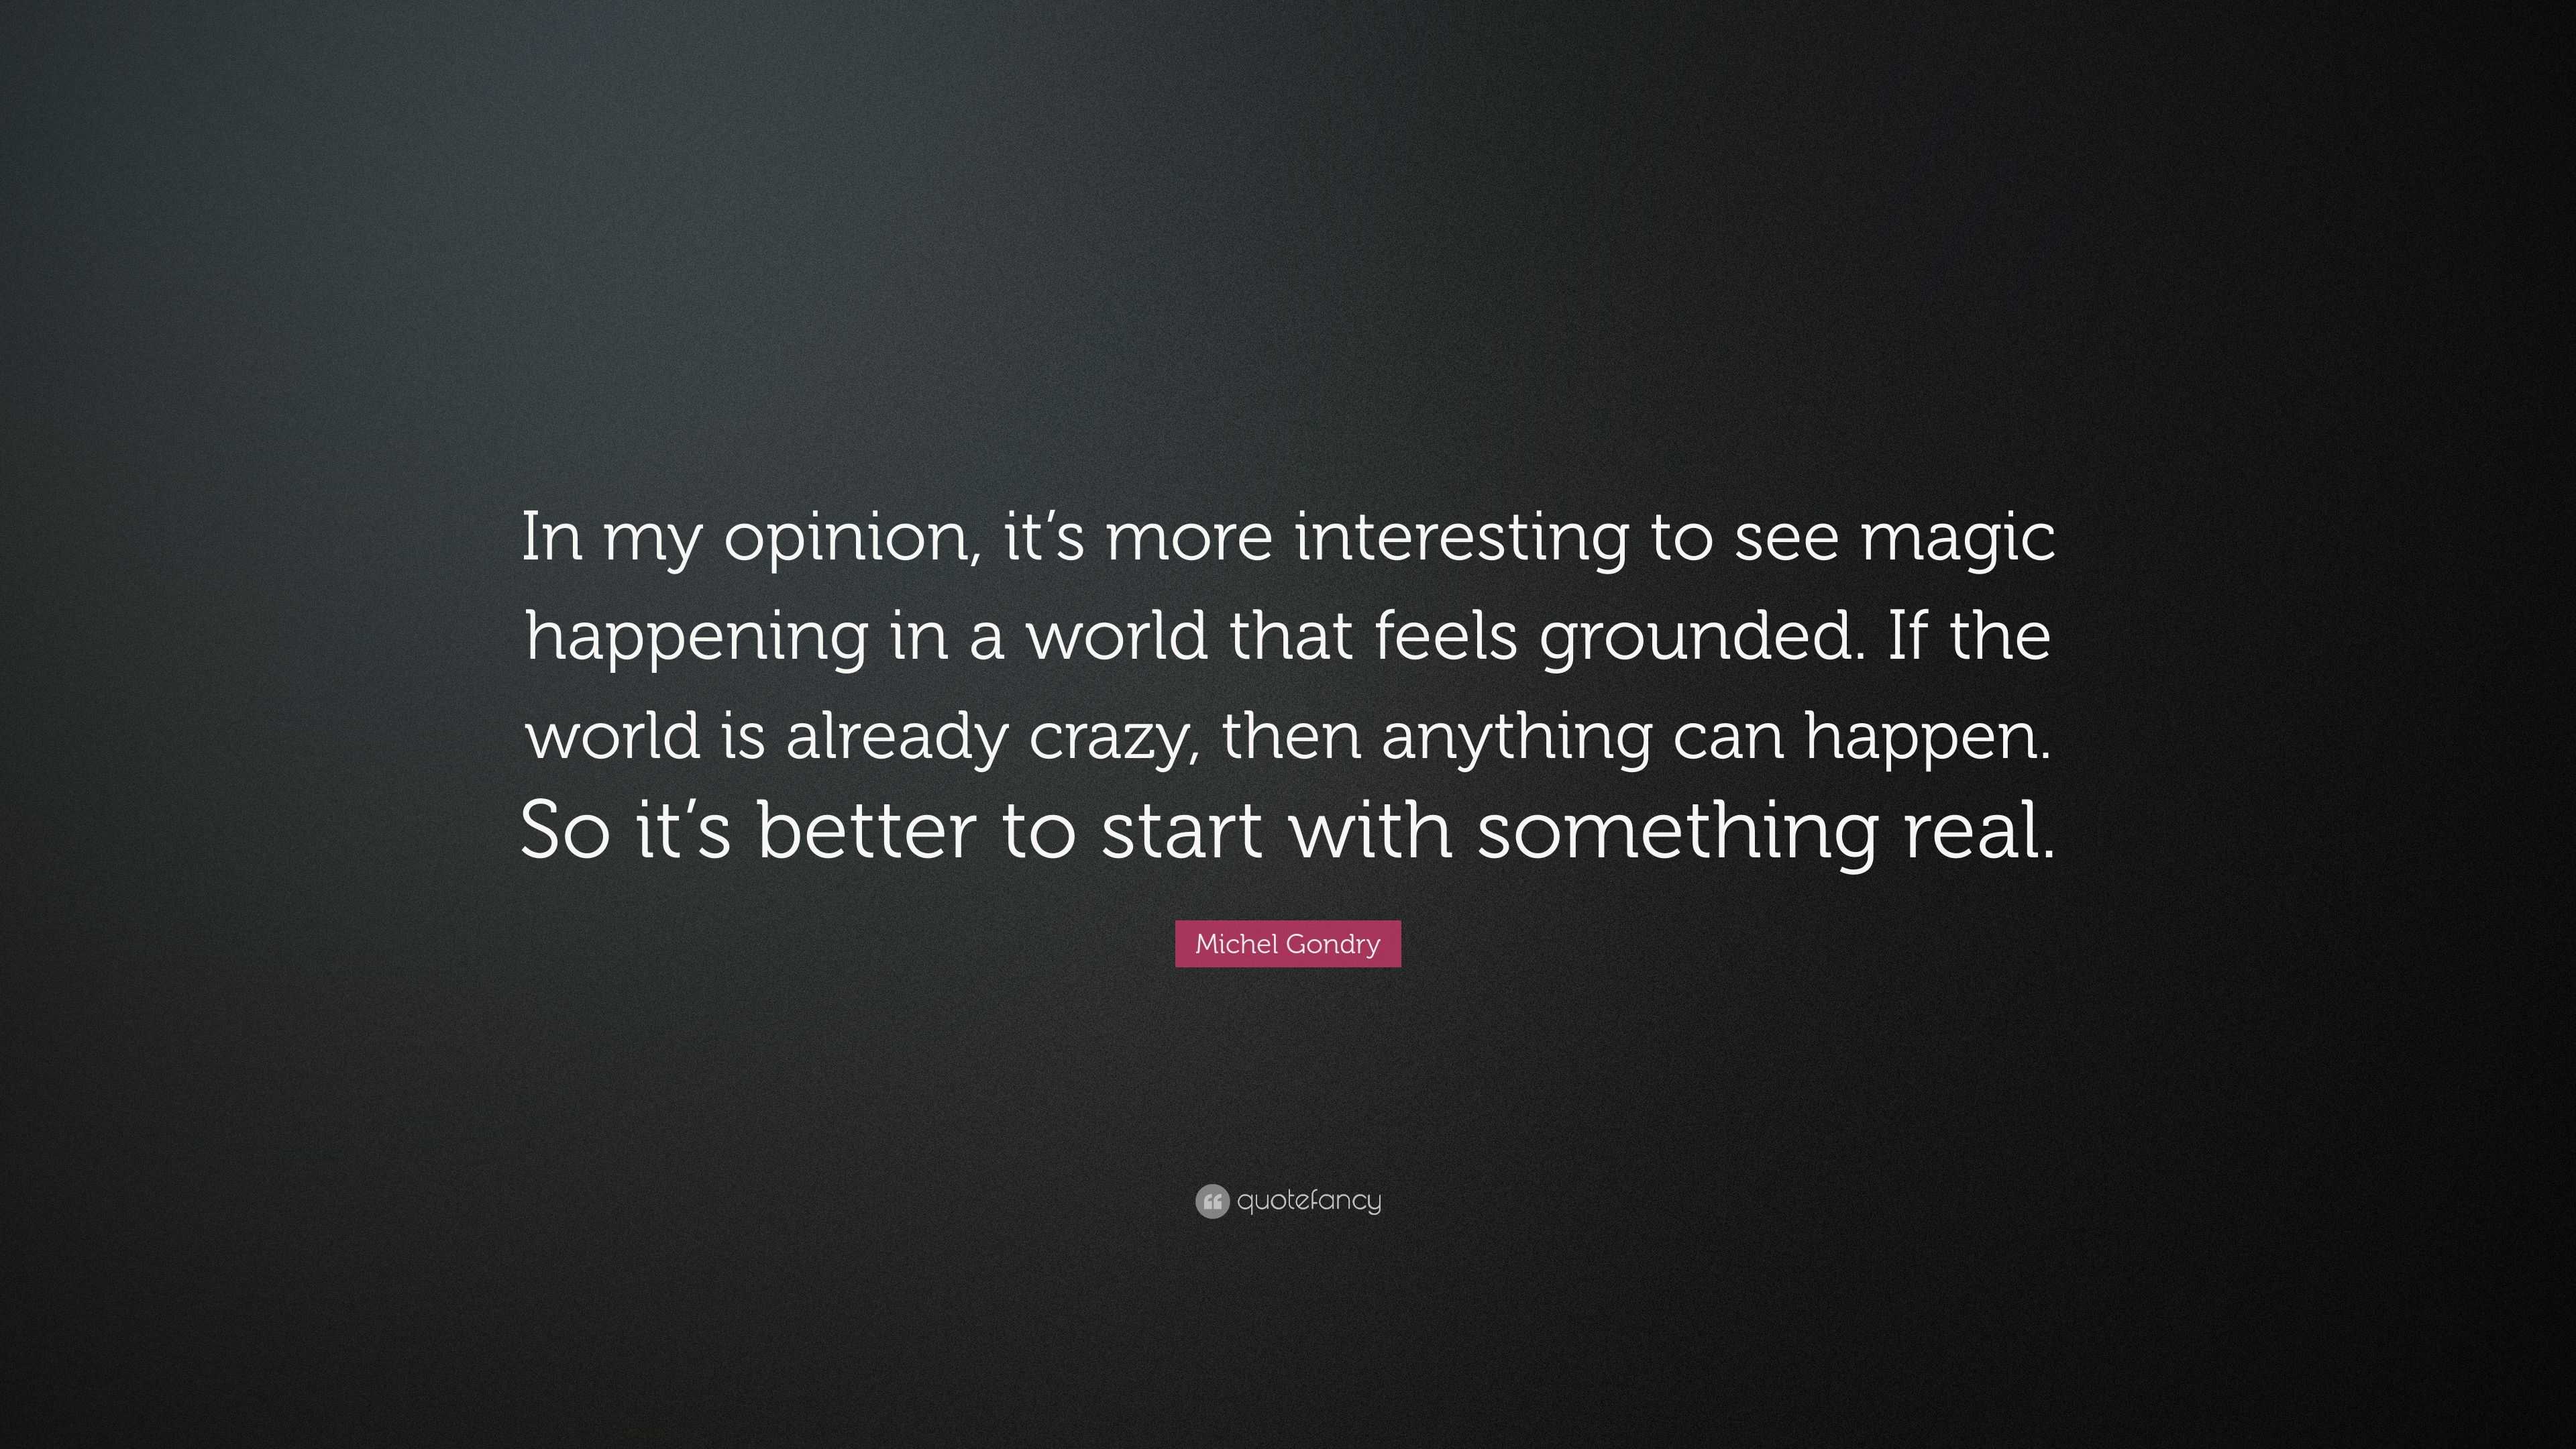 Michel Gondry Quote In My Opinion It S More Interesting To See Magic Happening In A World That Feels Grounded If The World Is Already Craz 7 Wallpapers Quotefancy